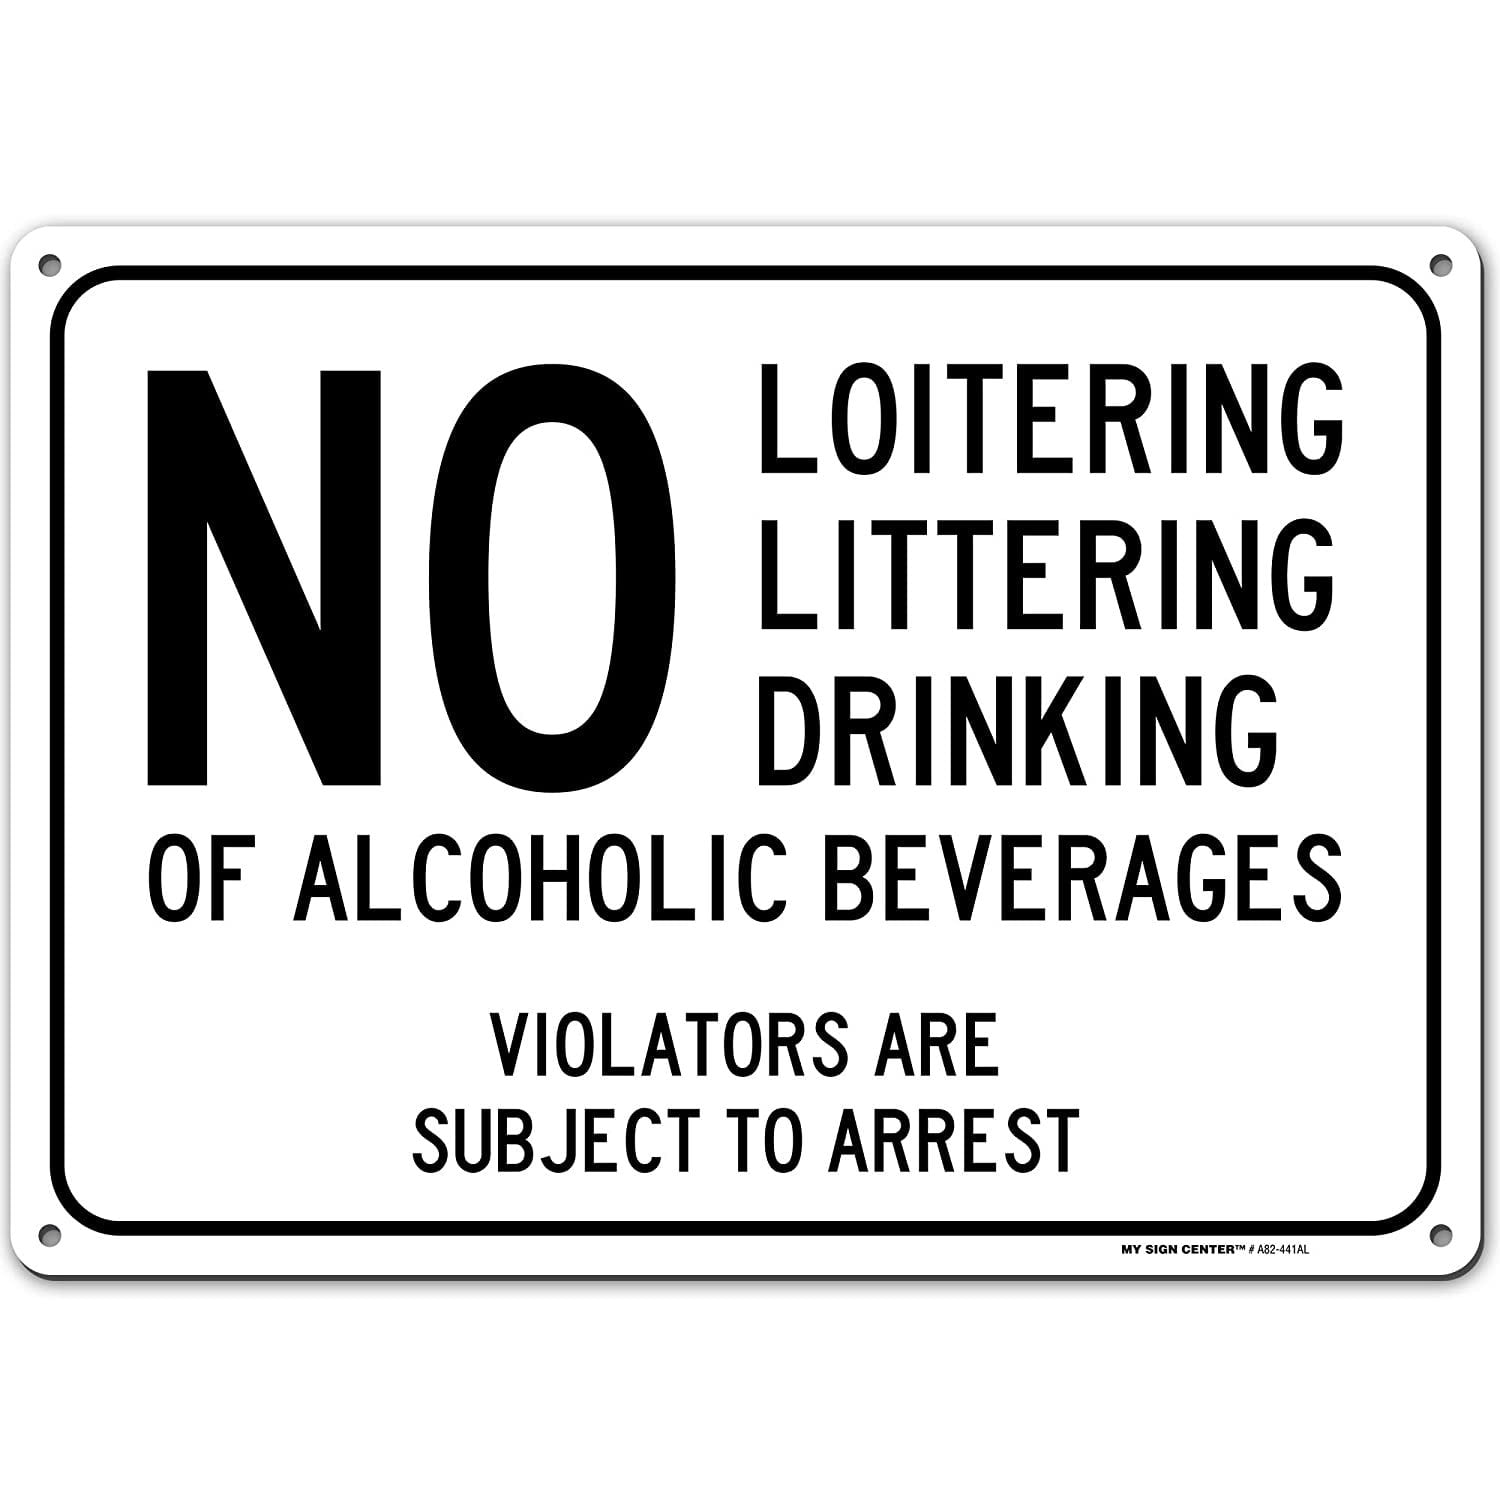 no-loitering-littering-drinking-of-alcoholic-beverages-violators-are-subject-to-arrest-sign-size